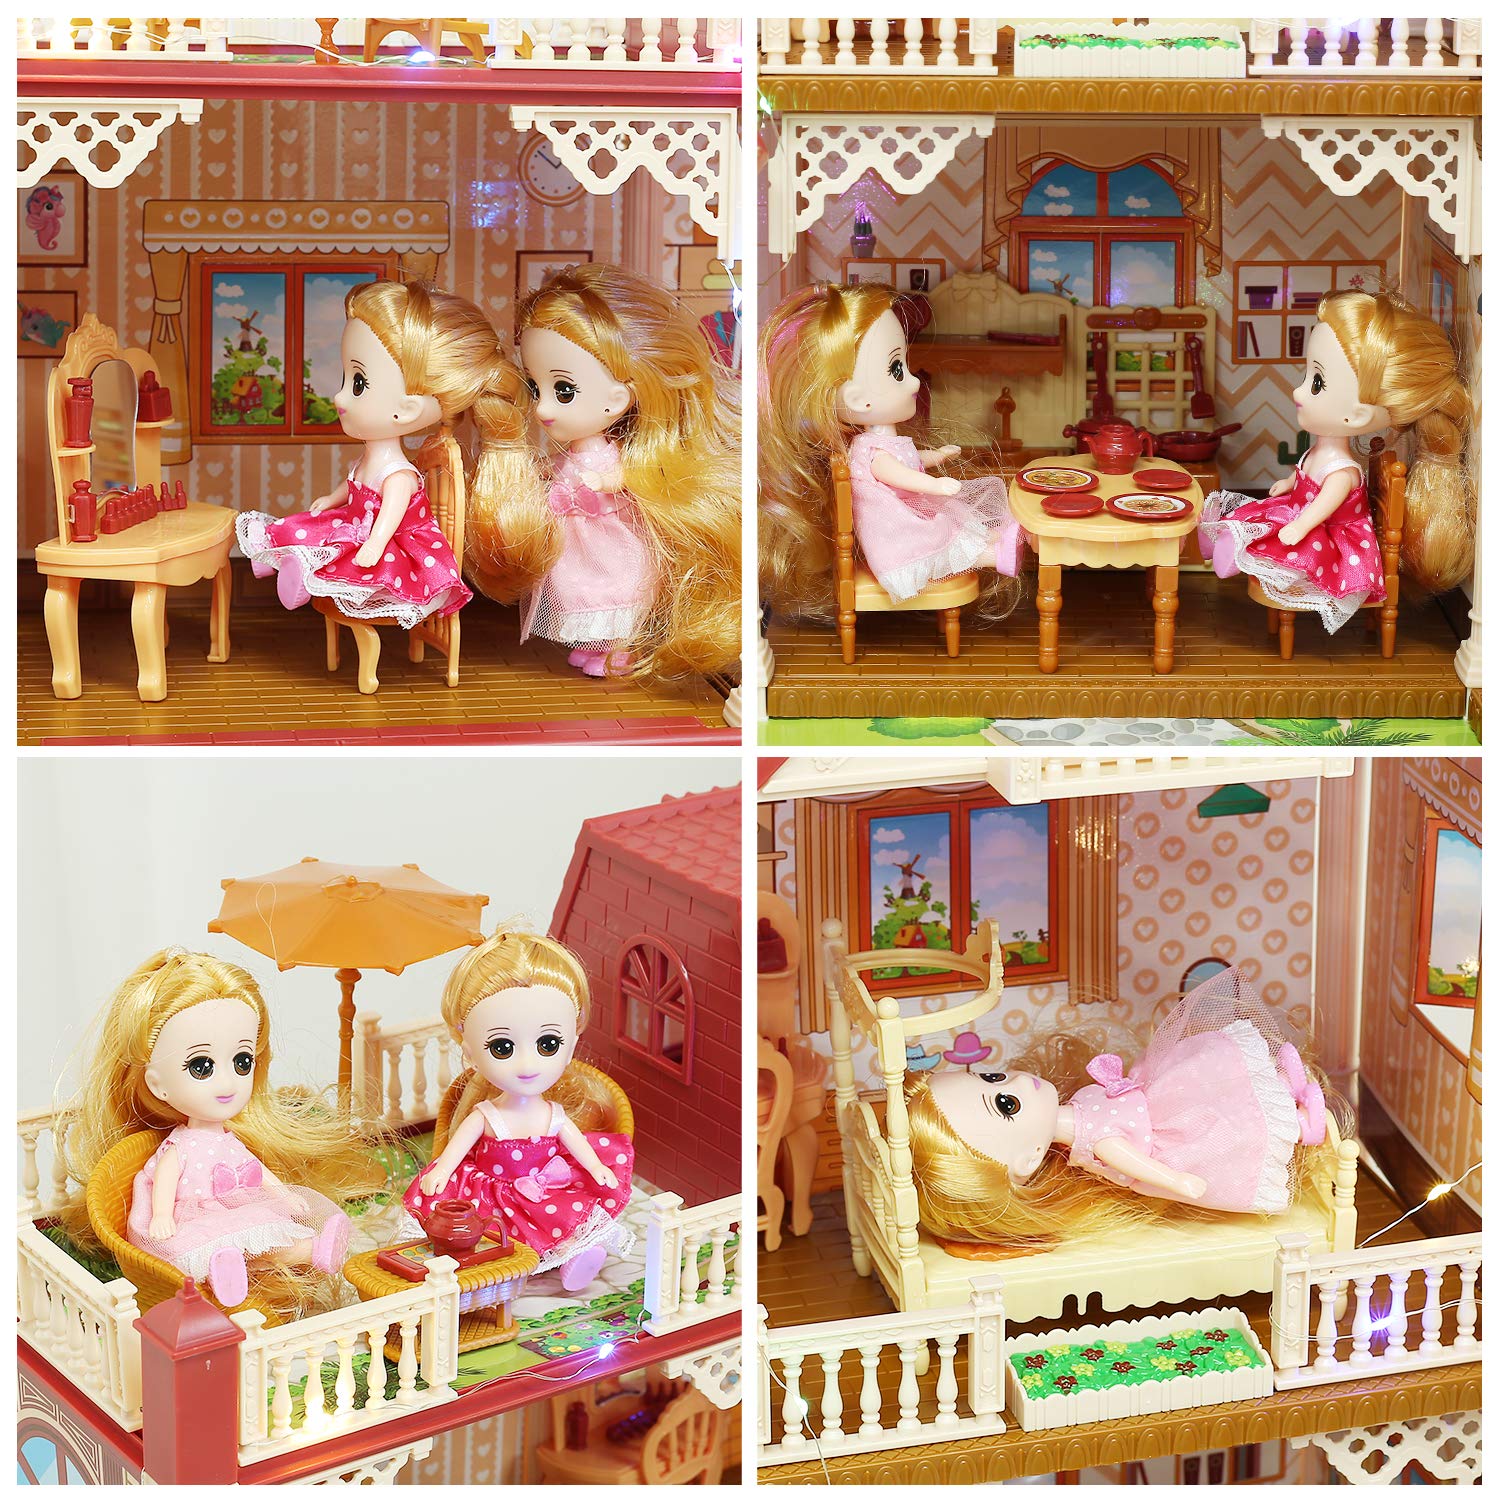 CUTE STONE Huge Dollhouse with 2 Dolls and Colorful Light, 26